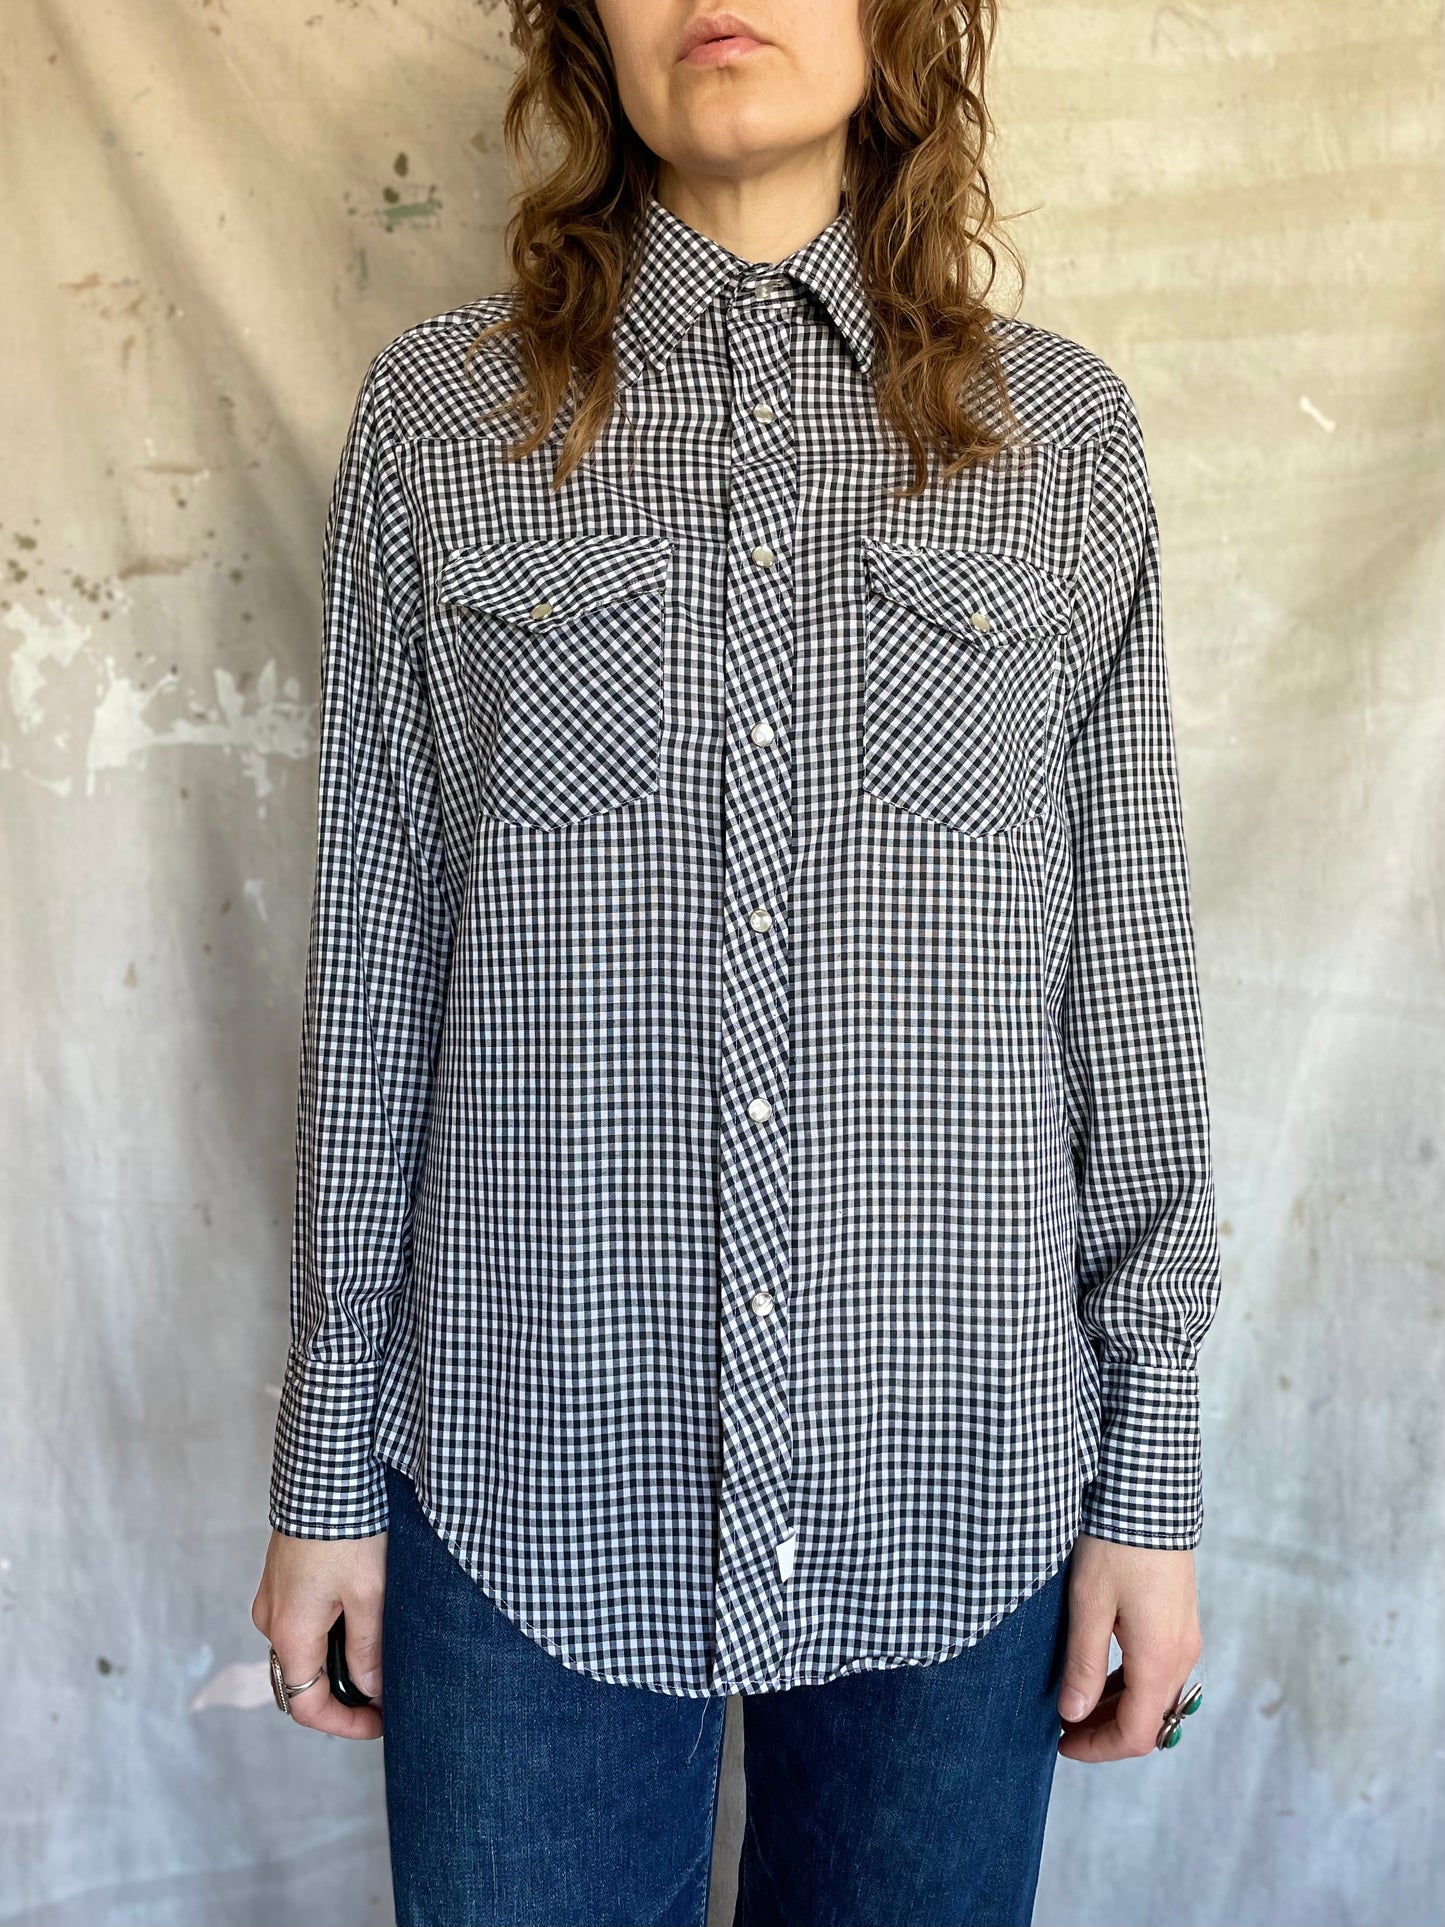 80s Gingham Pearl Snap Western Shirt